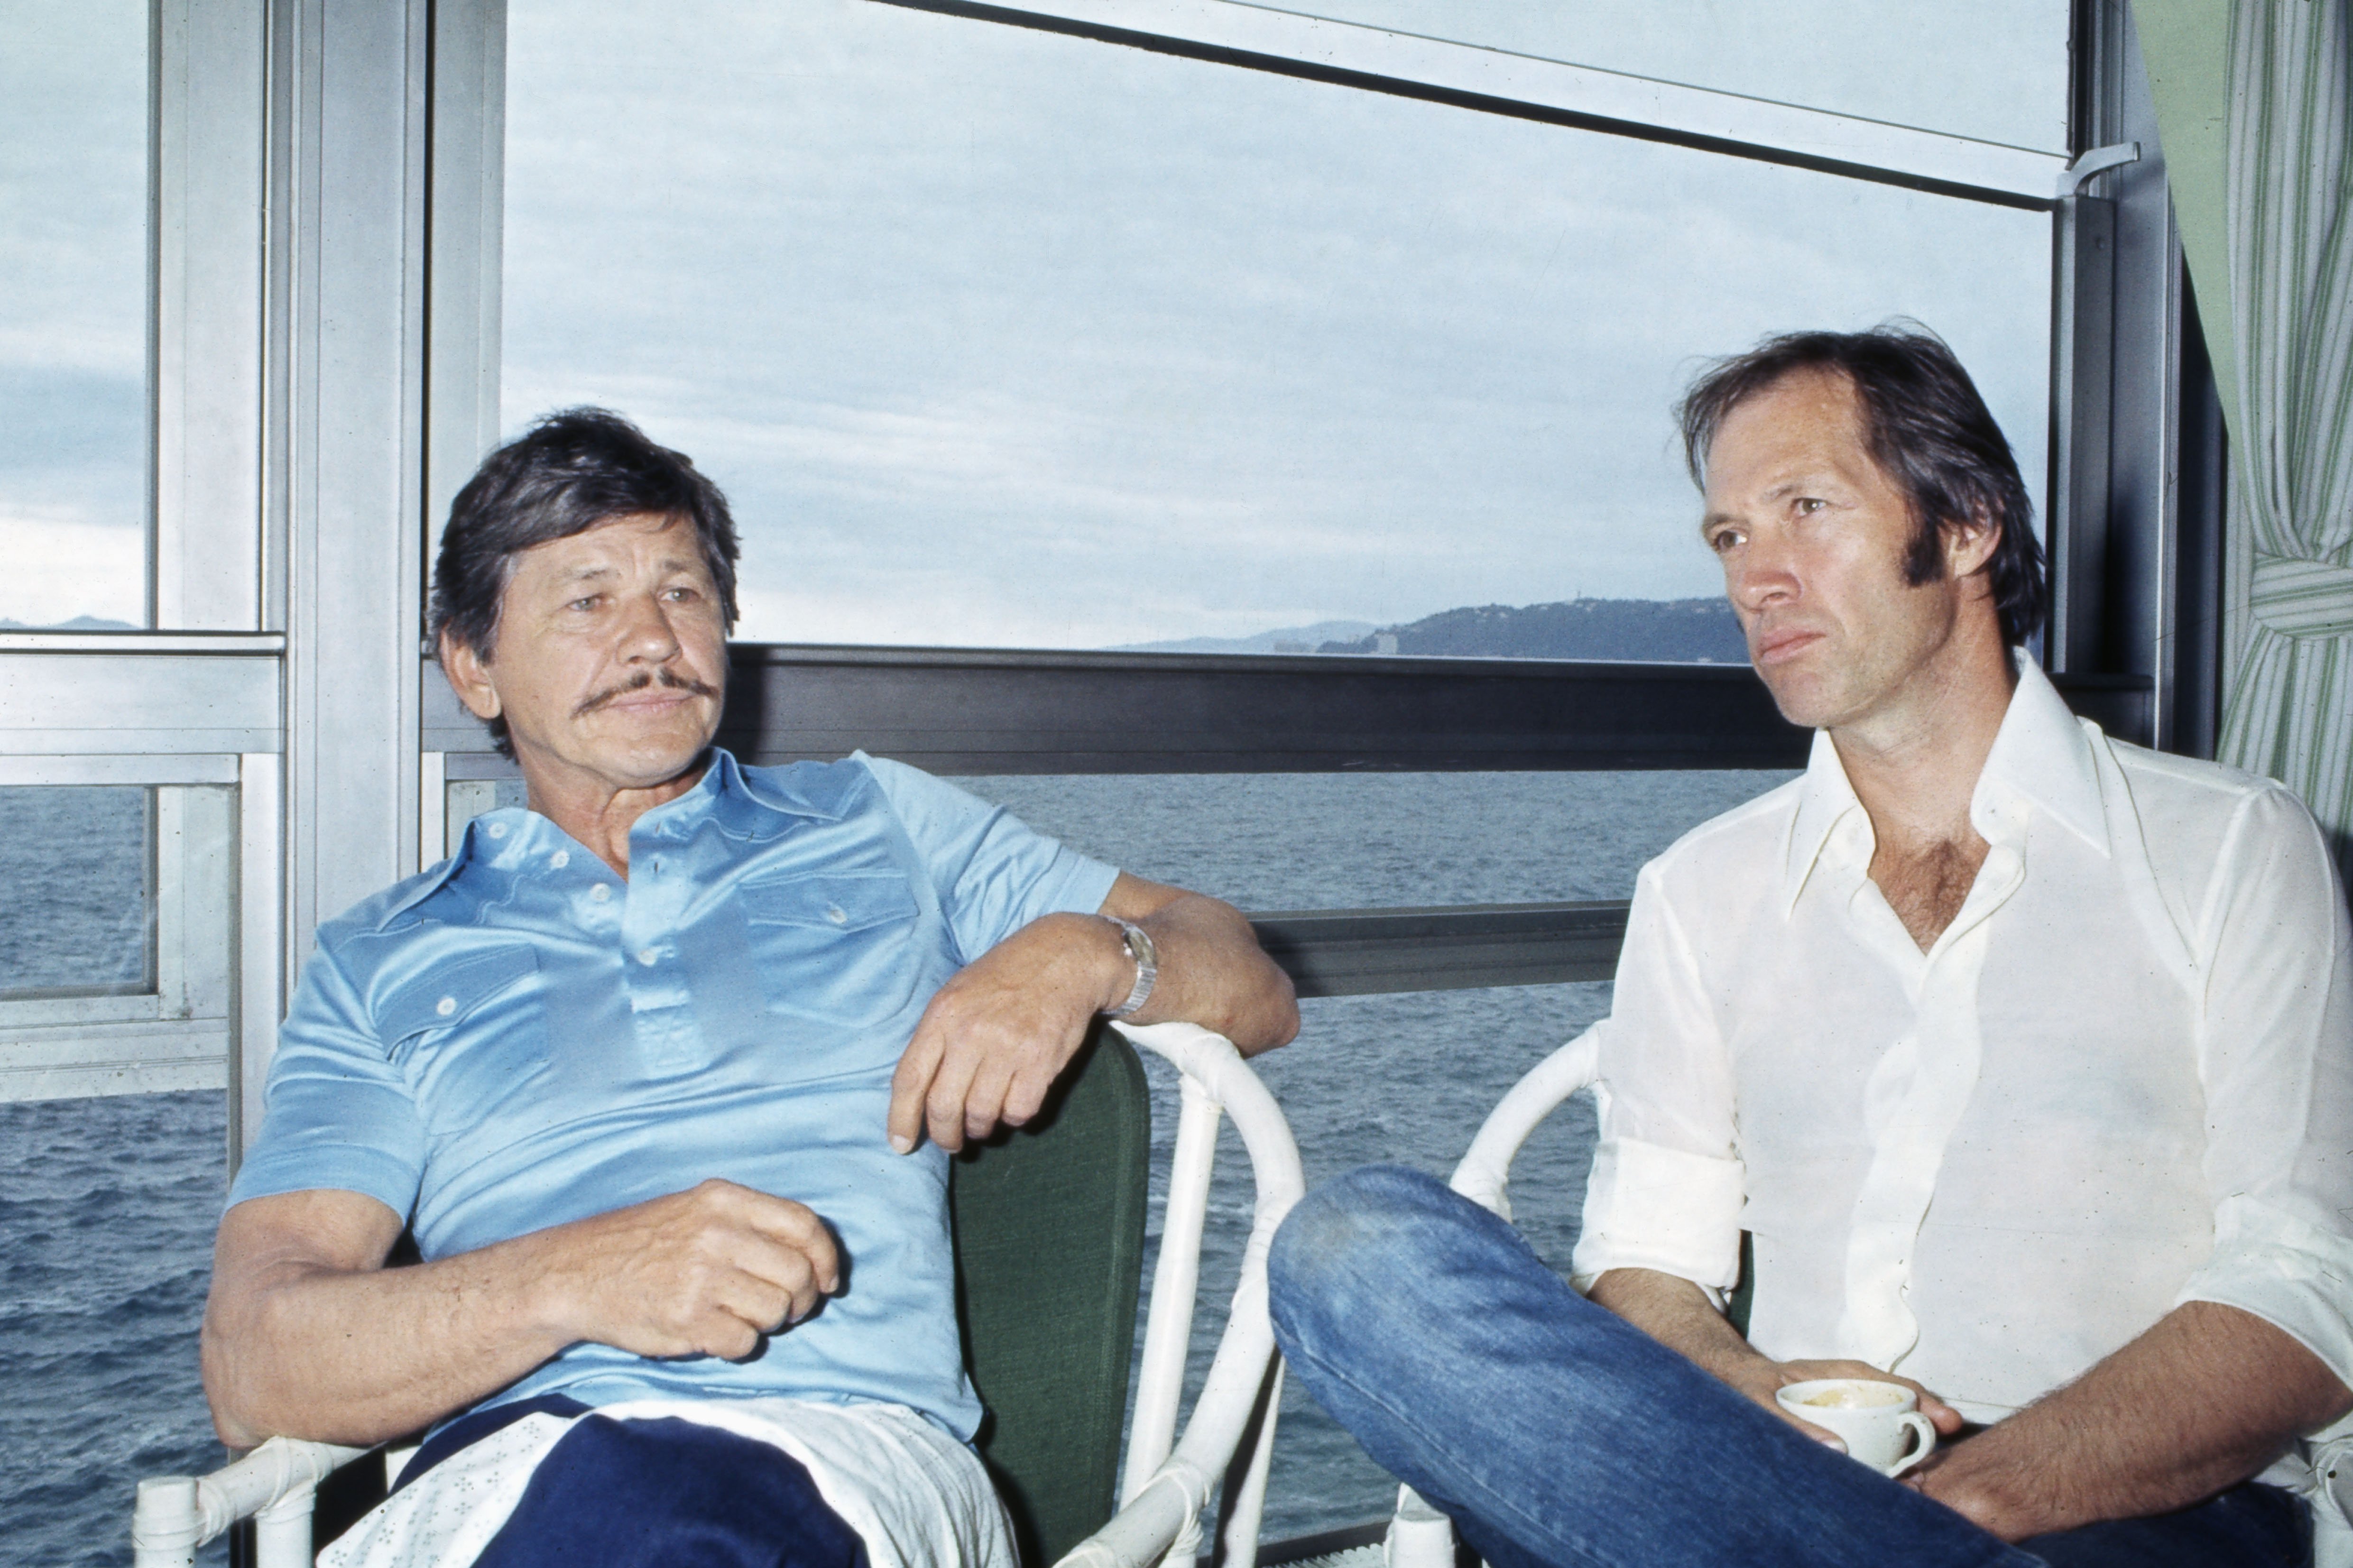 American actors Charles Bronson and David Carradine relaxing at the Cannes Film Festival, 1977. | Source: Getty Images